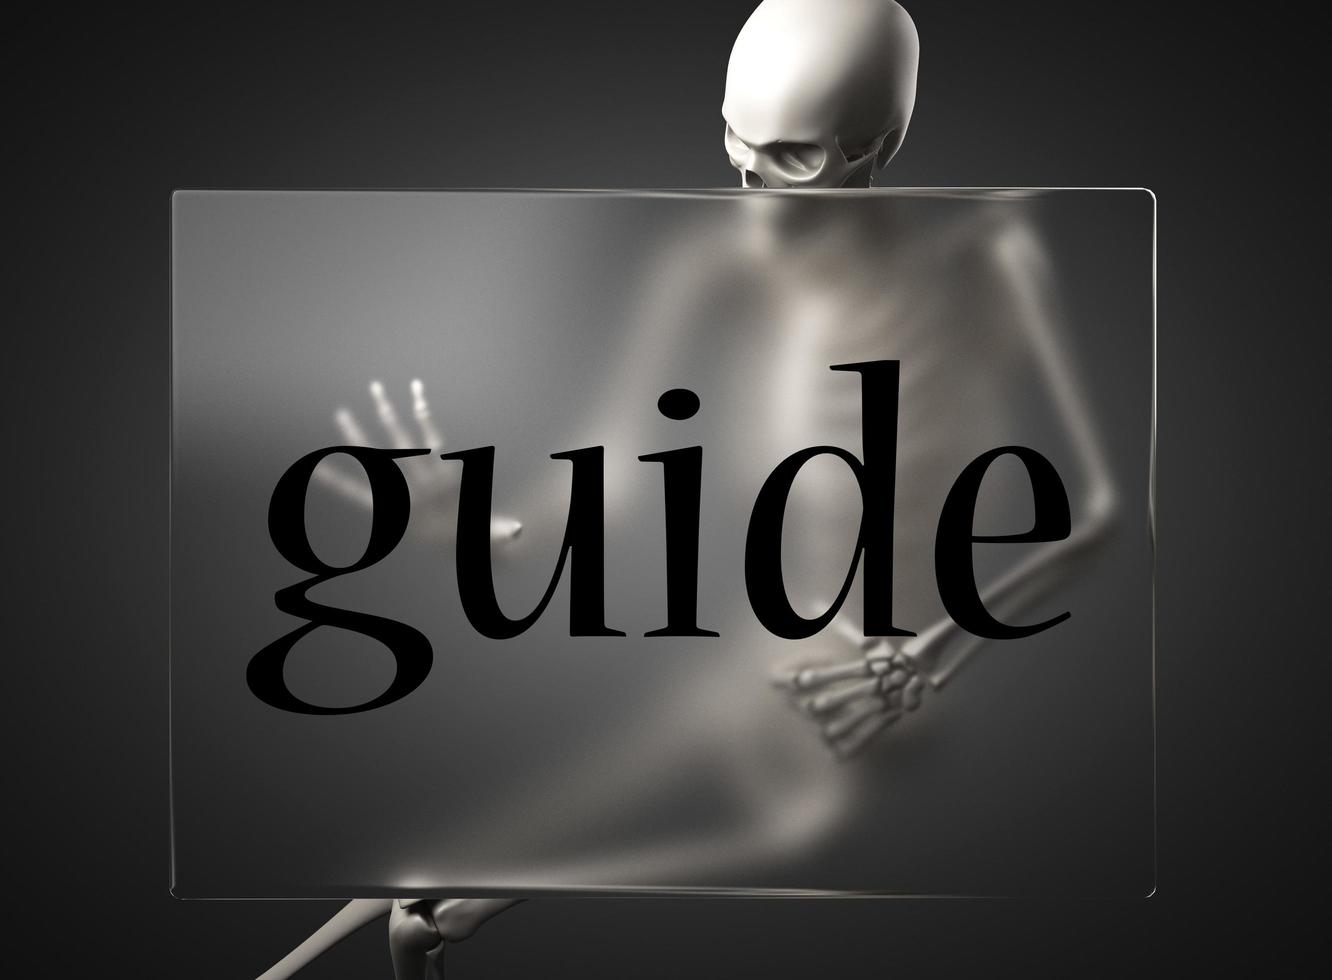 guide word on glass and skeleton photo